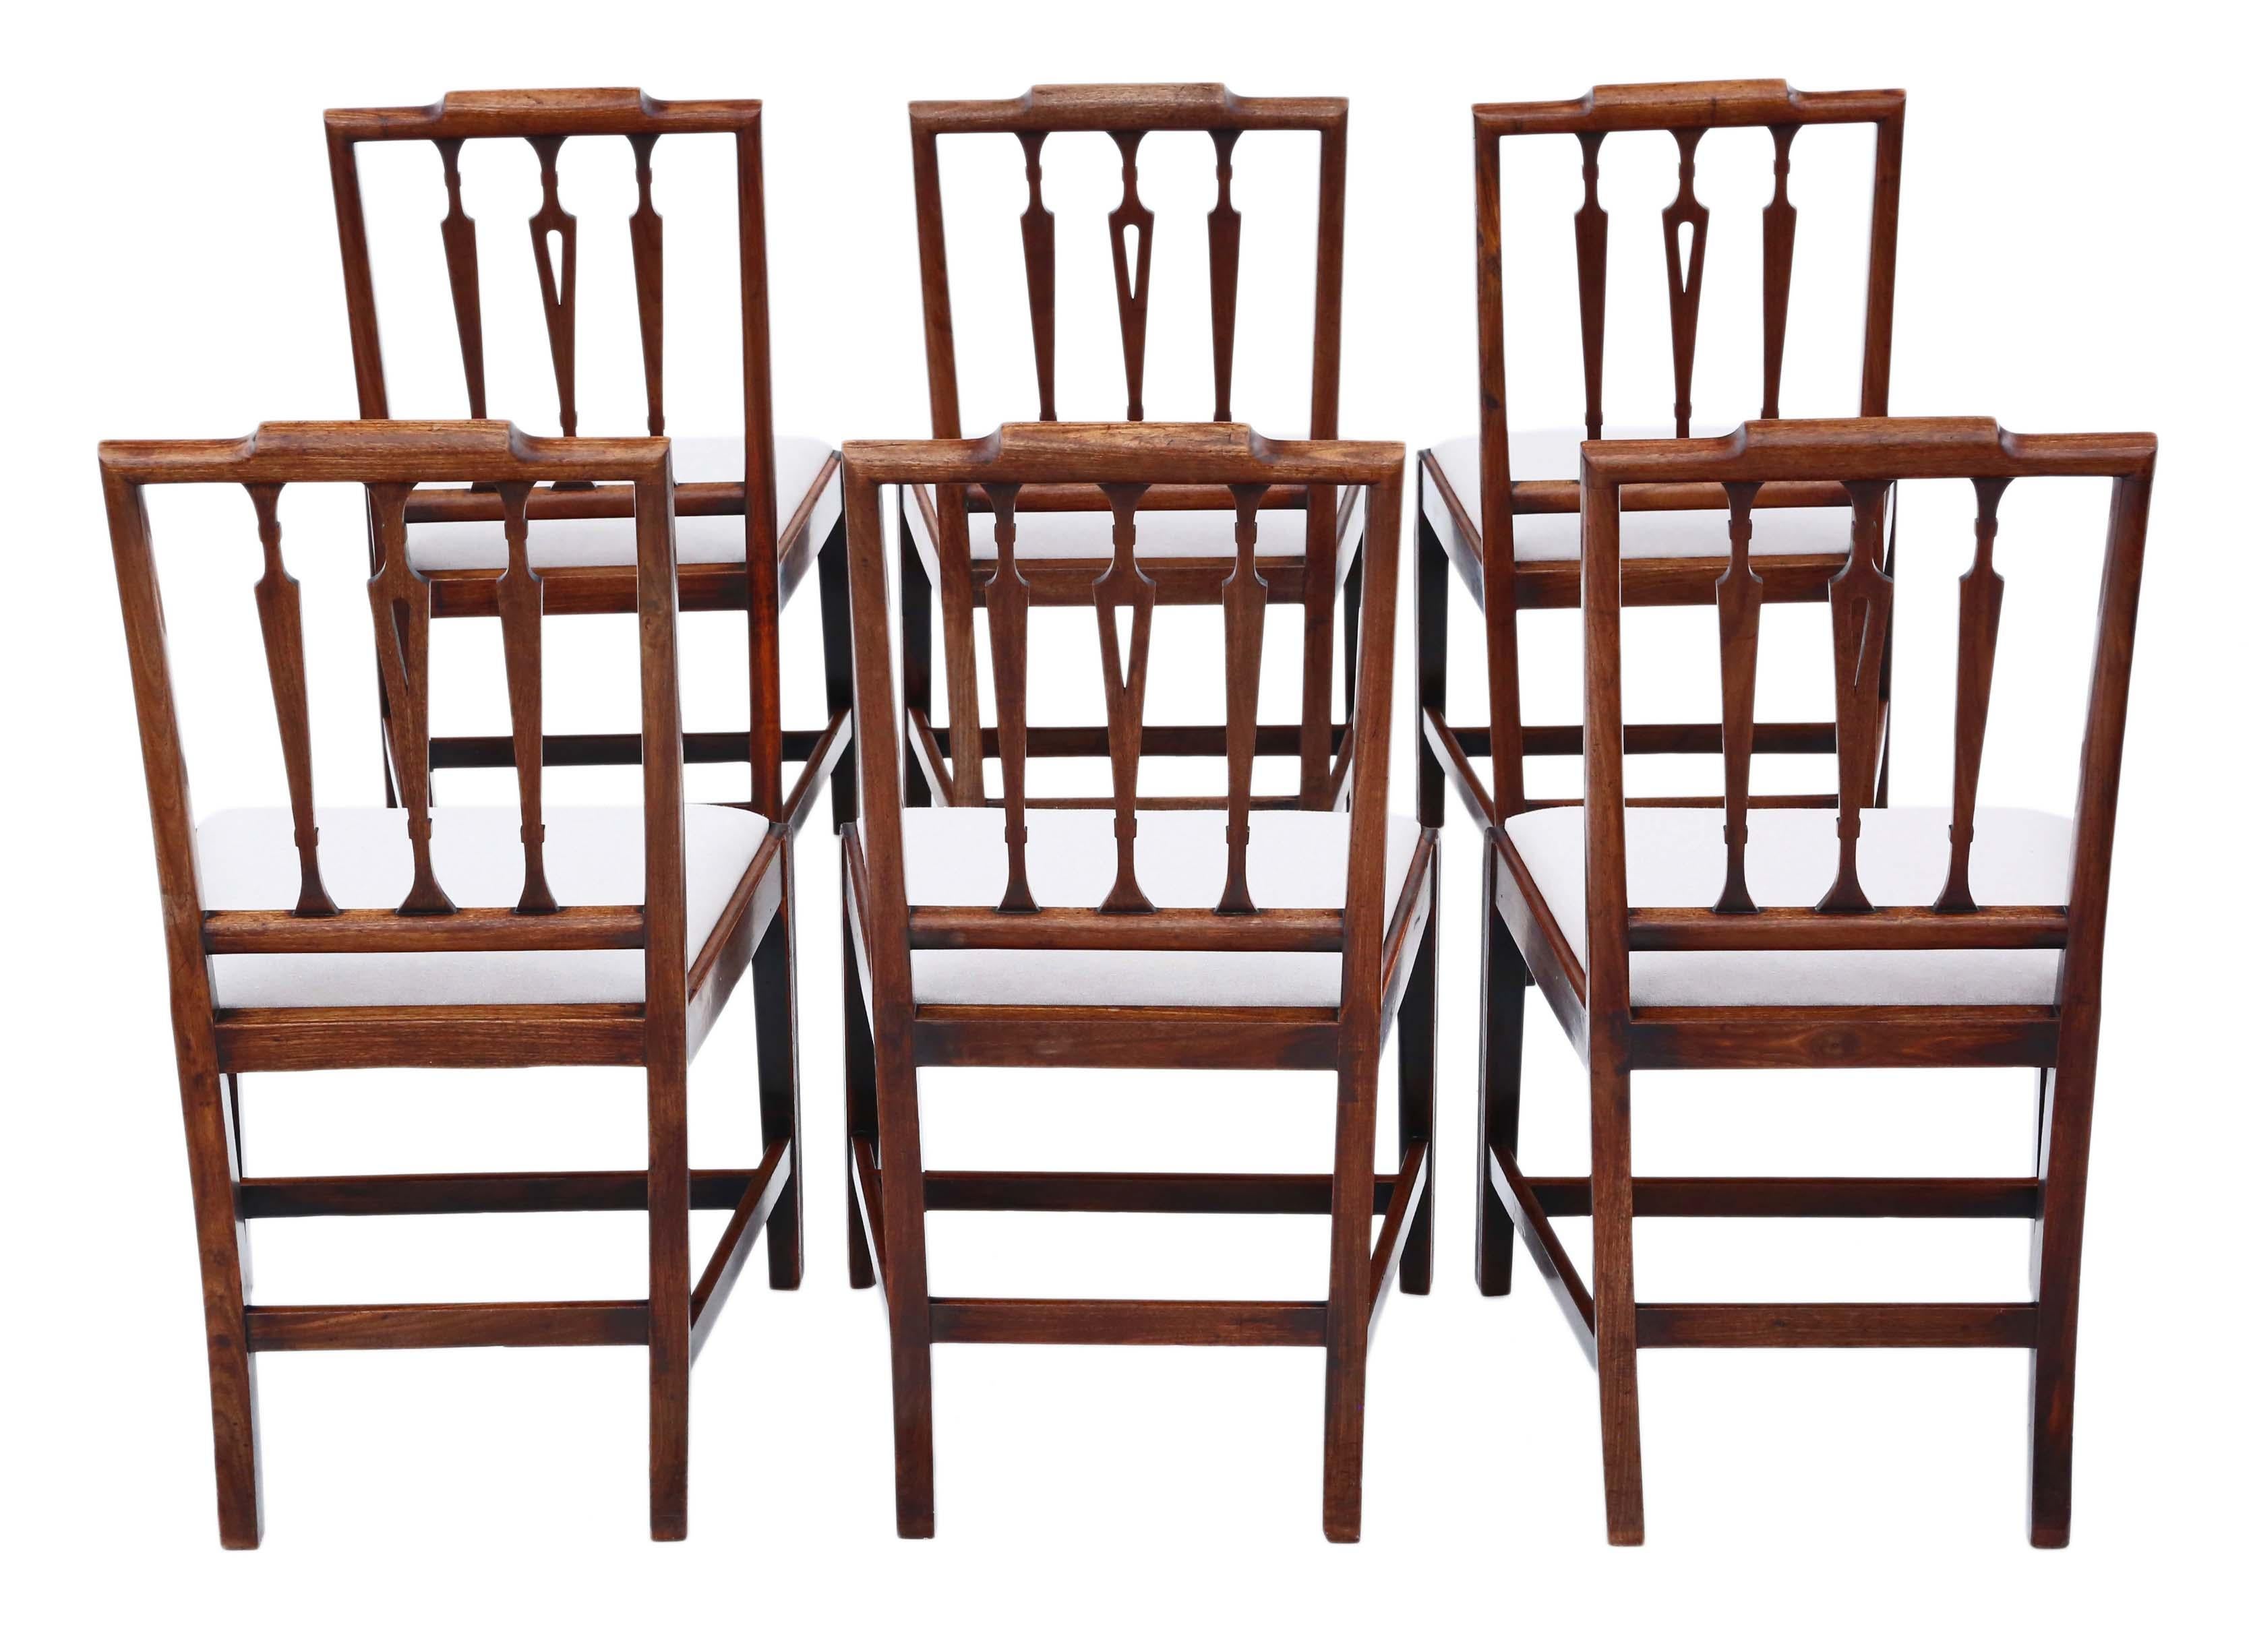 Antique fine quality set of 6 Georgian mahogany dining chairs 19th century C1820.

A rare find and a bit special.

No loose joints or woodworm.

New, professional upholstery.

Overall maximum dimensions:

52cmW x 48cmD x 94cmH (45cmH seat